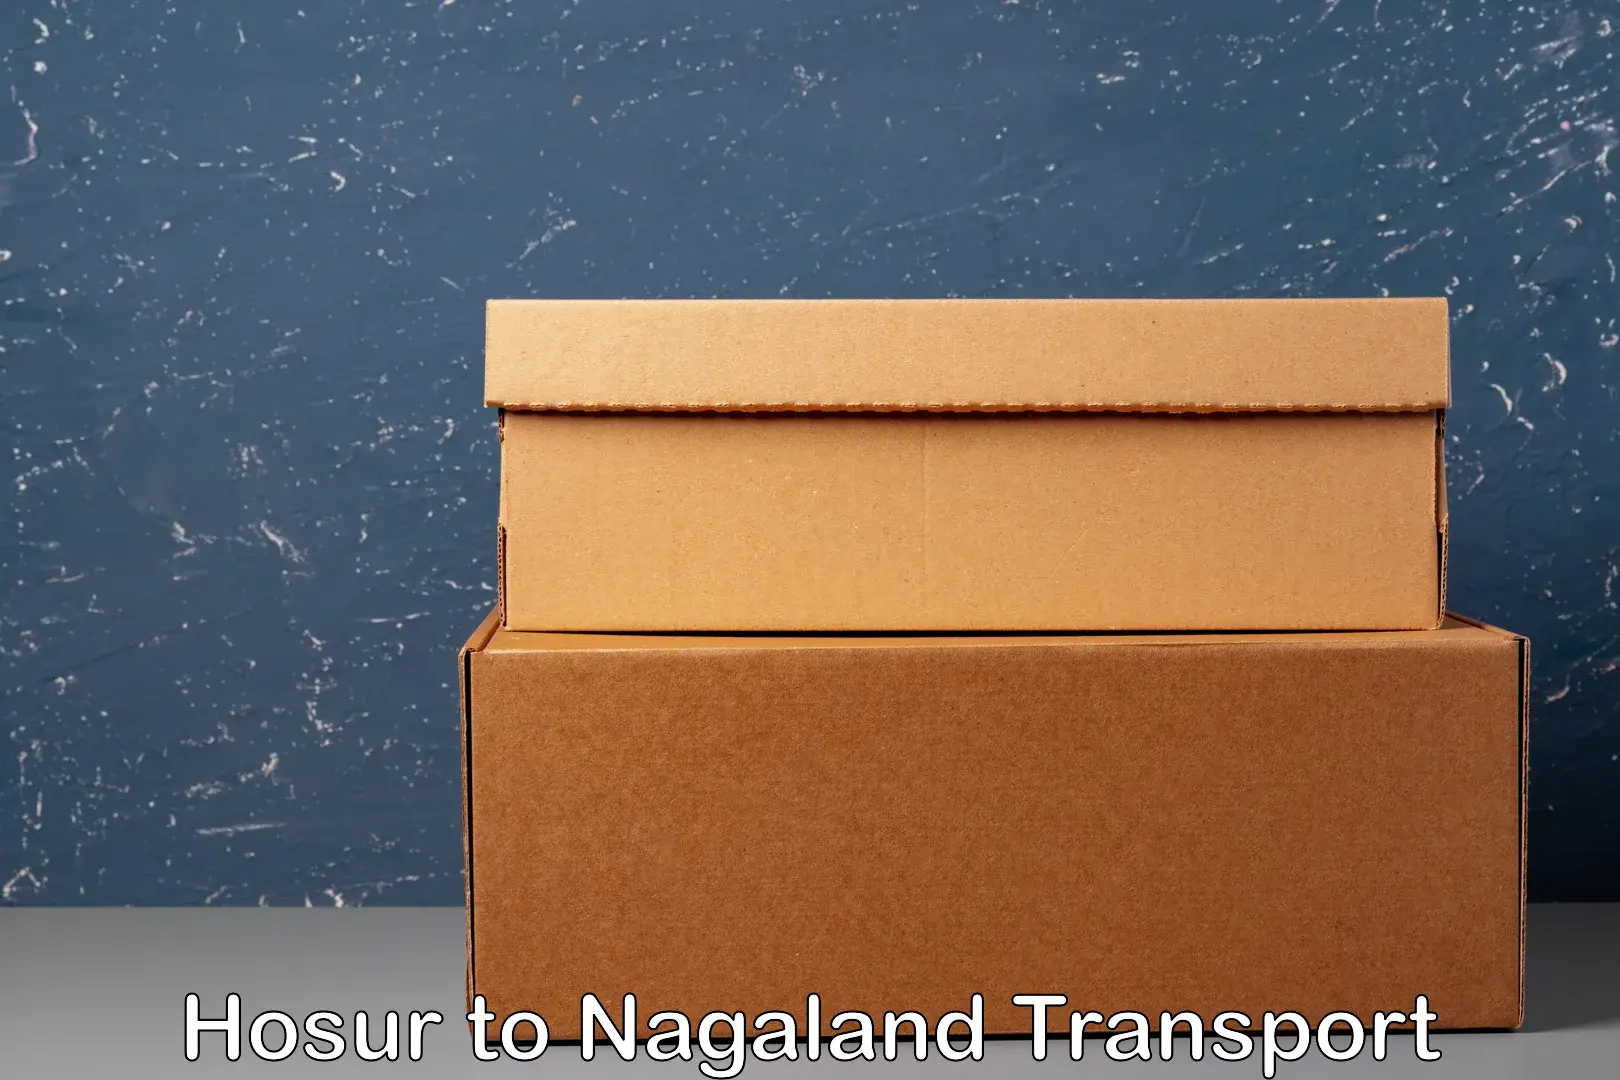 Air freight transport services Hosur to Nagaland